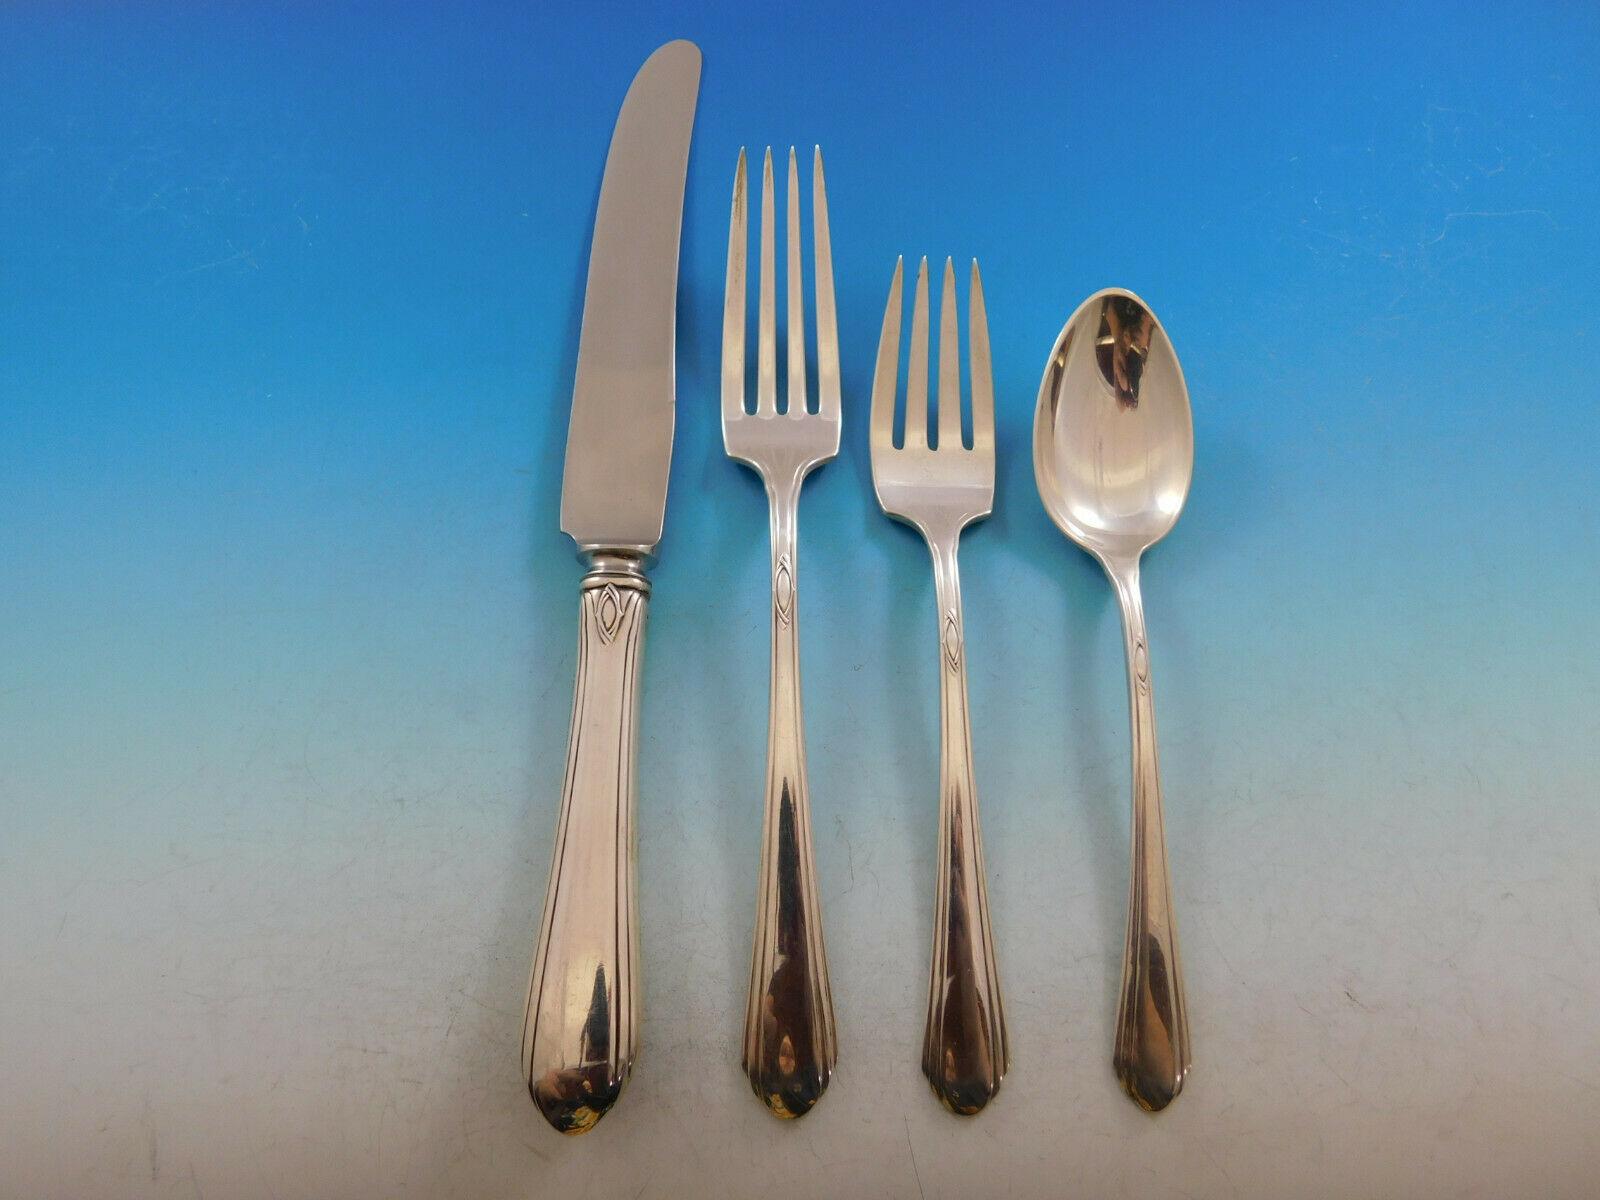 Lady Diana by Towle sterling silver flatware set - 56 pieces. This set includes:

Eight knives, 8 7/8